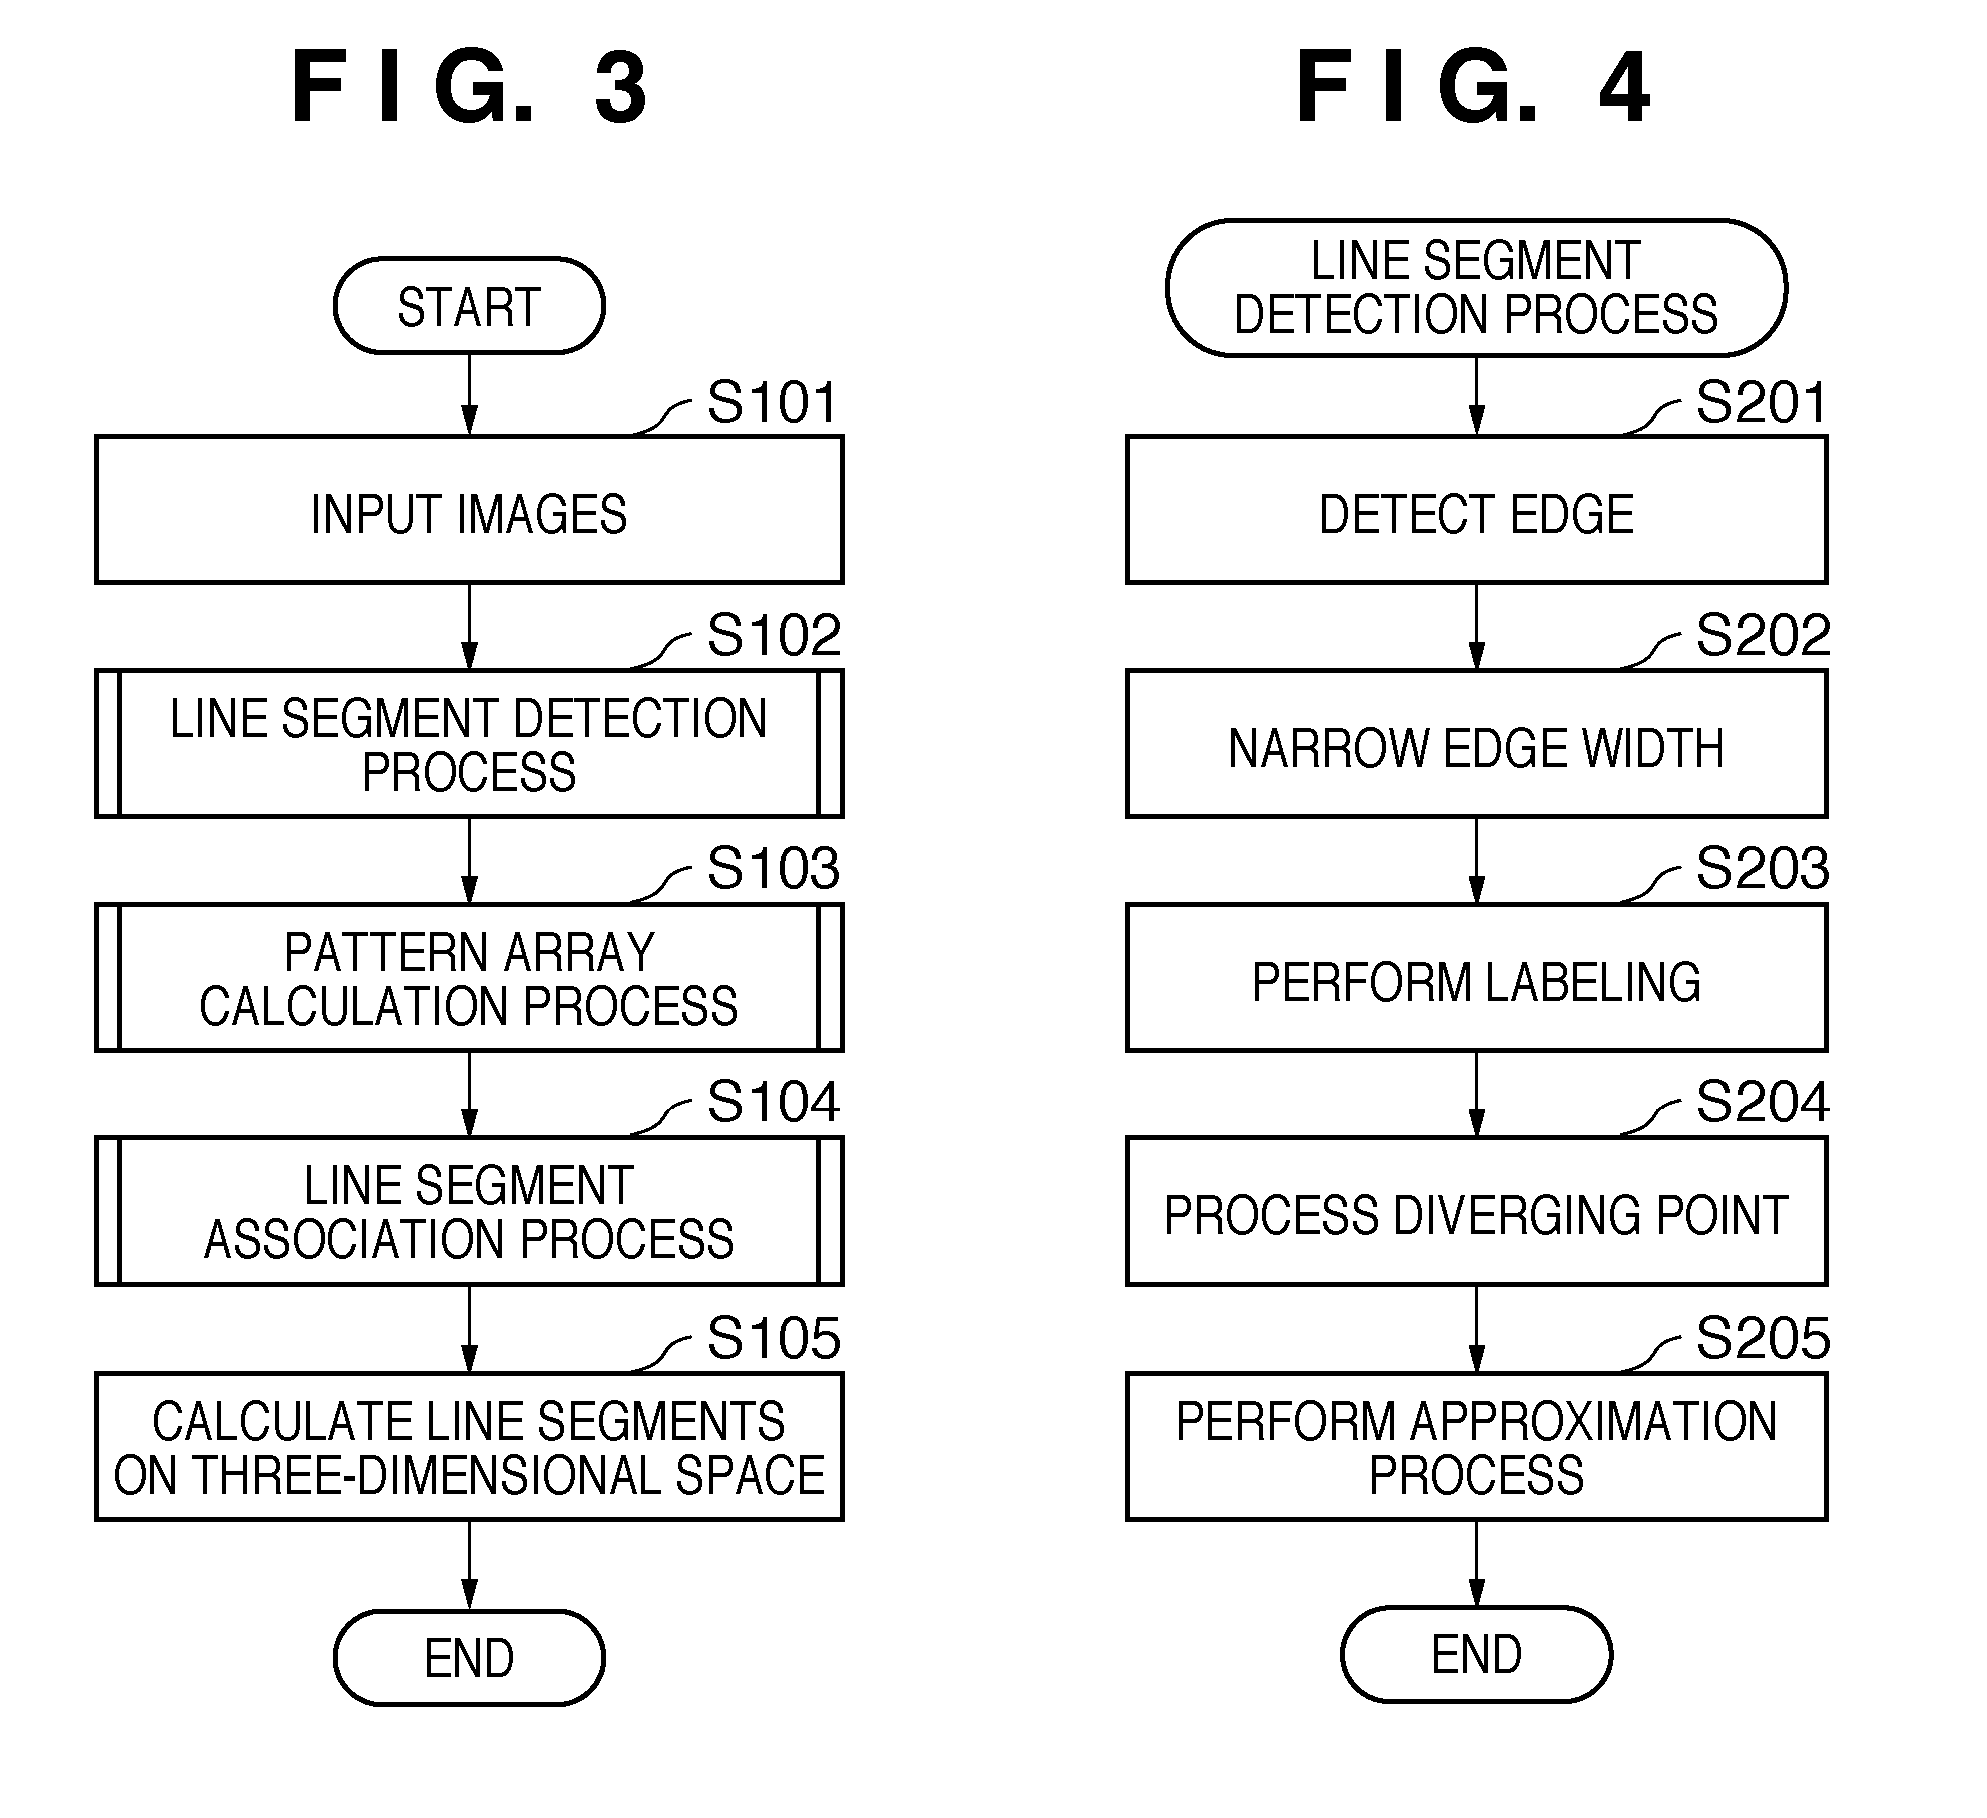 3D model generating apparatus, method and CRM by line pattern imaging